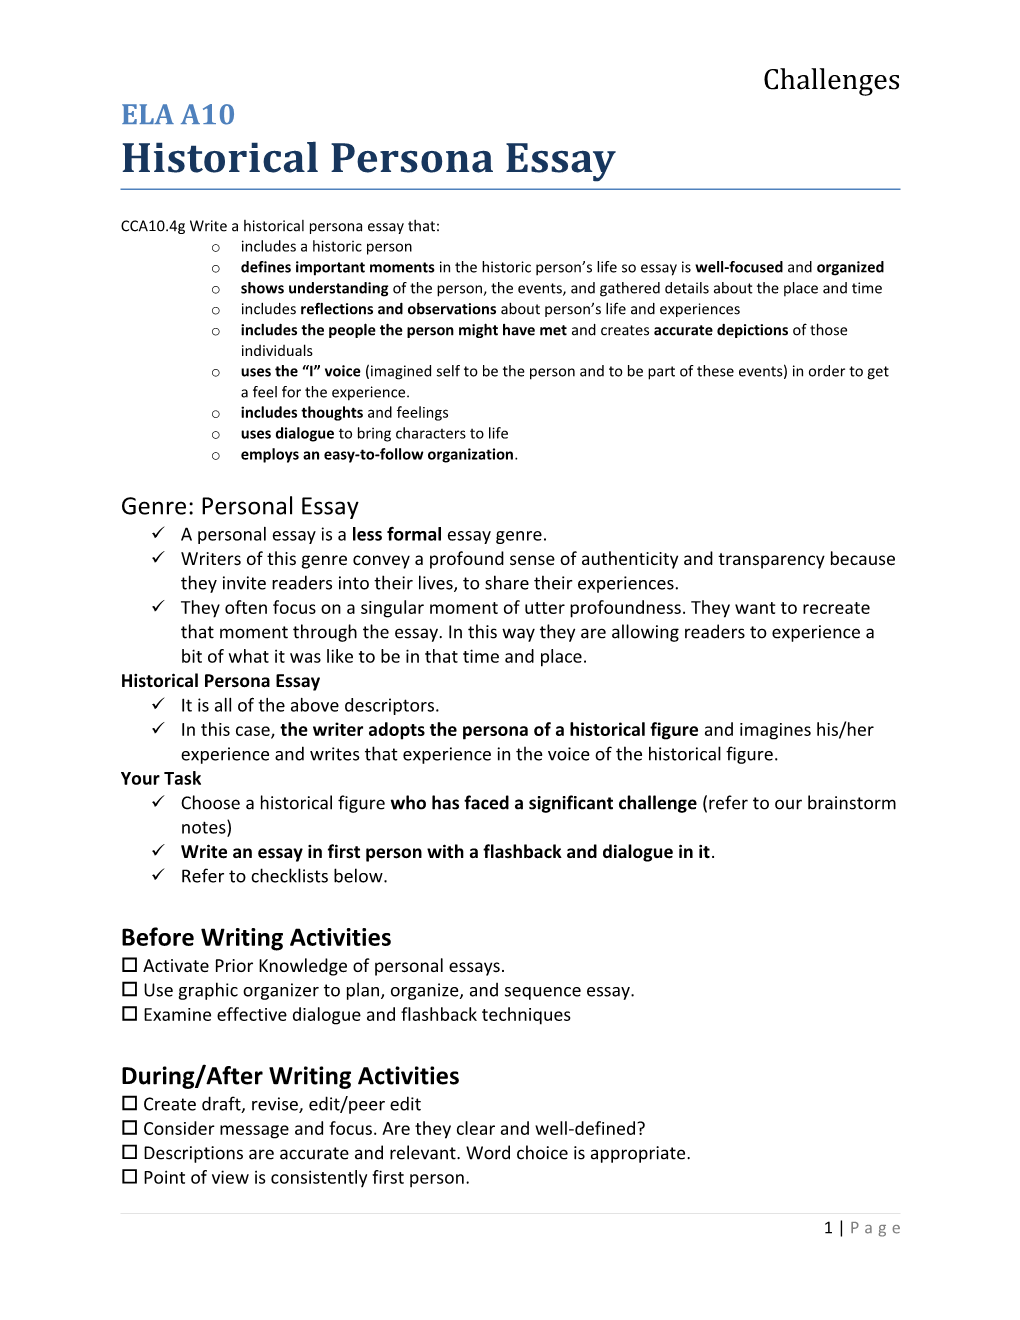 CCA10.4G Write a Historical Persona Essay That